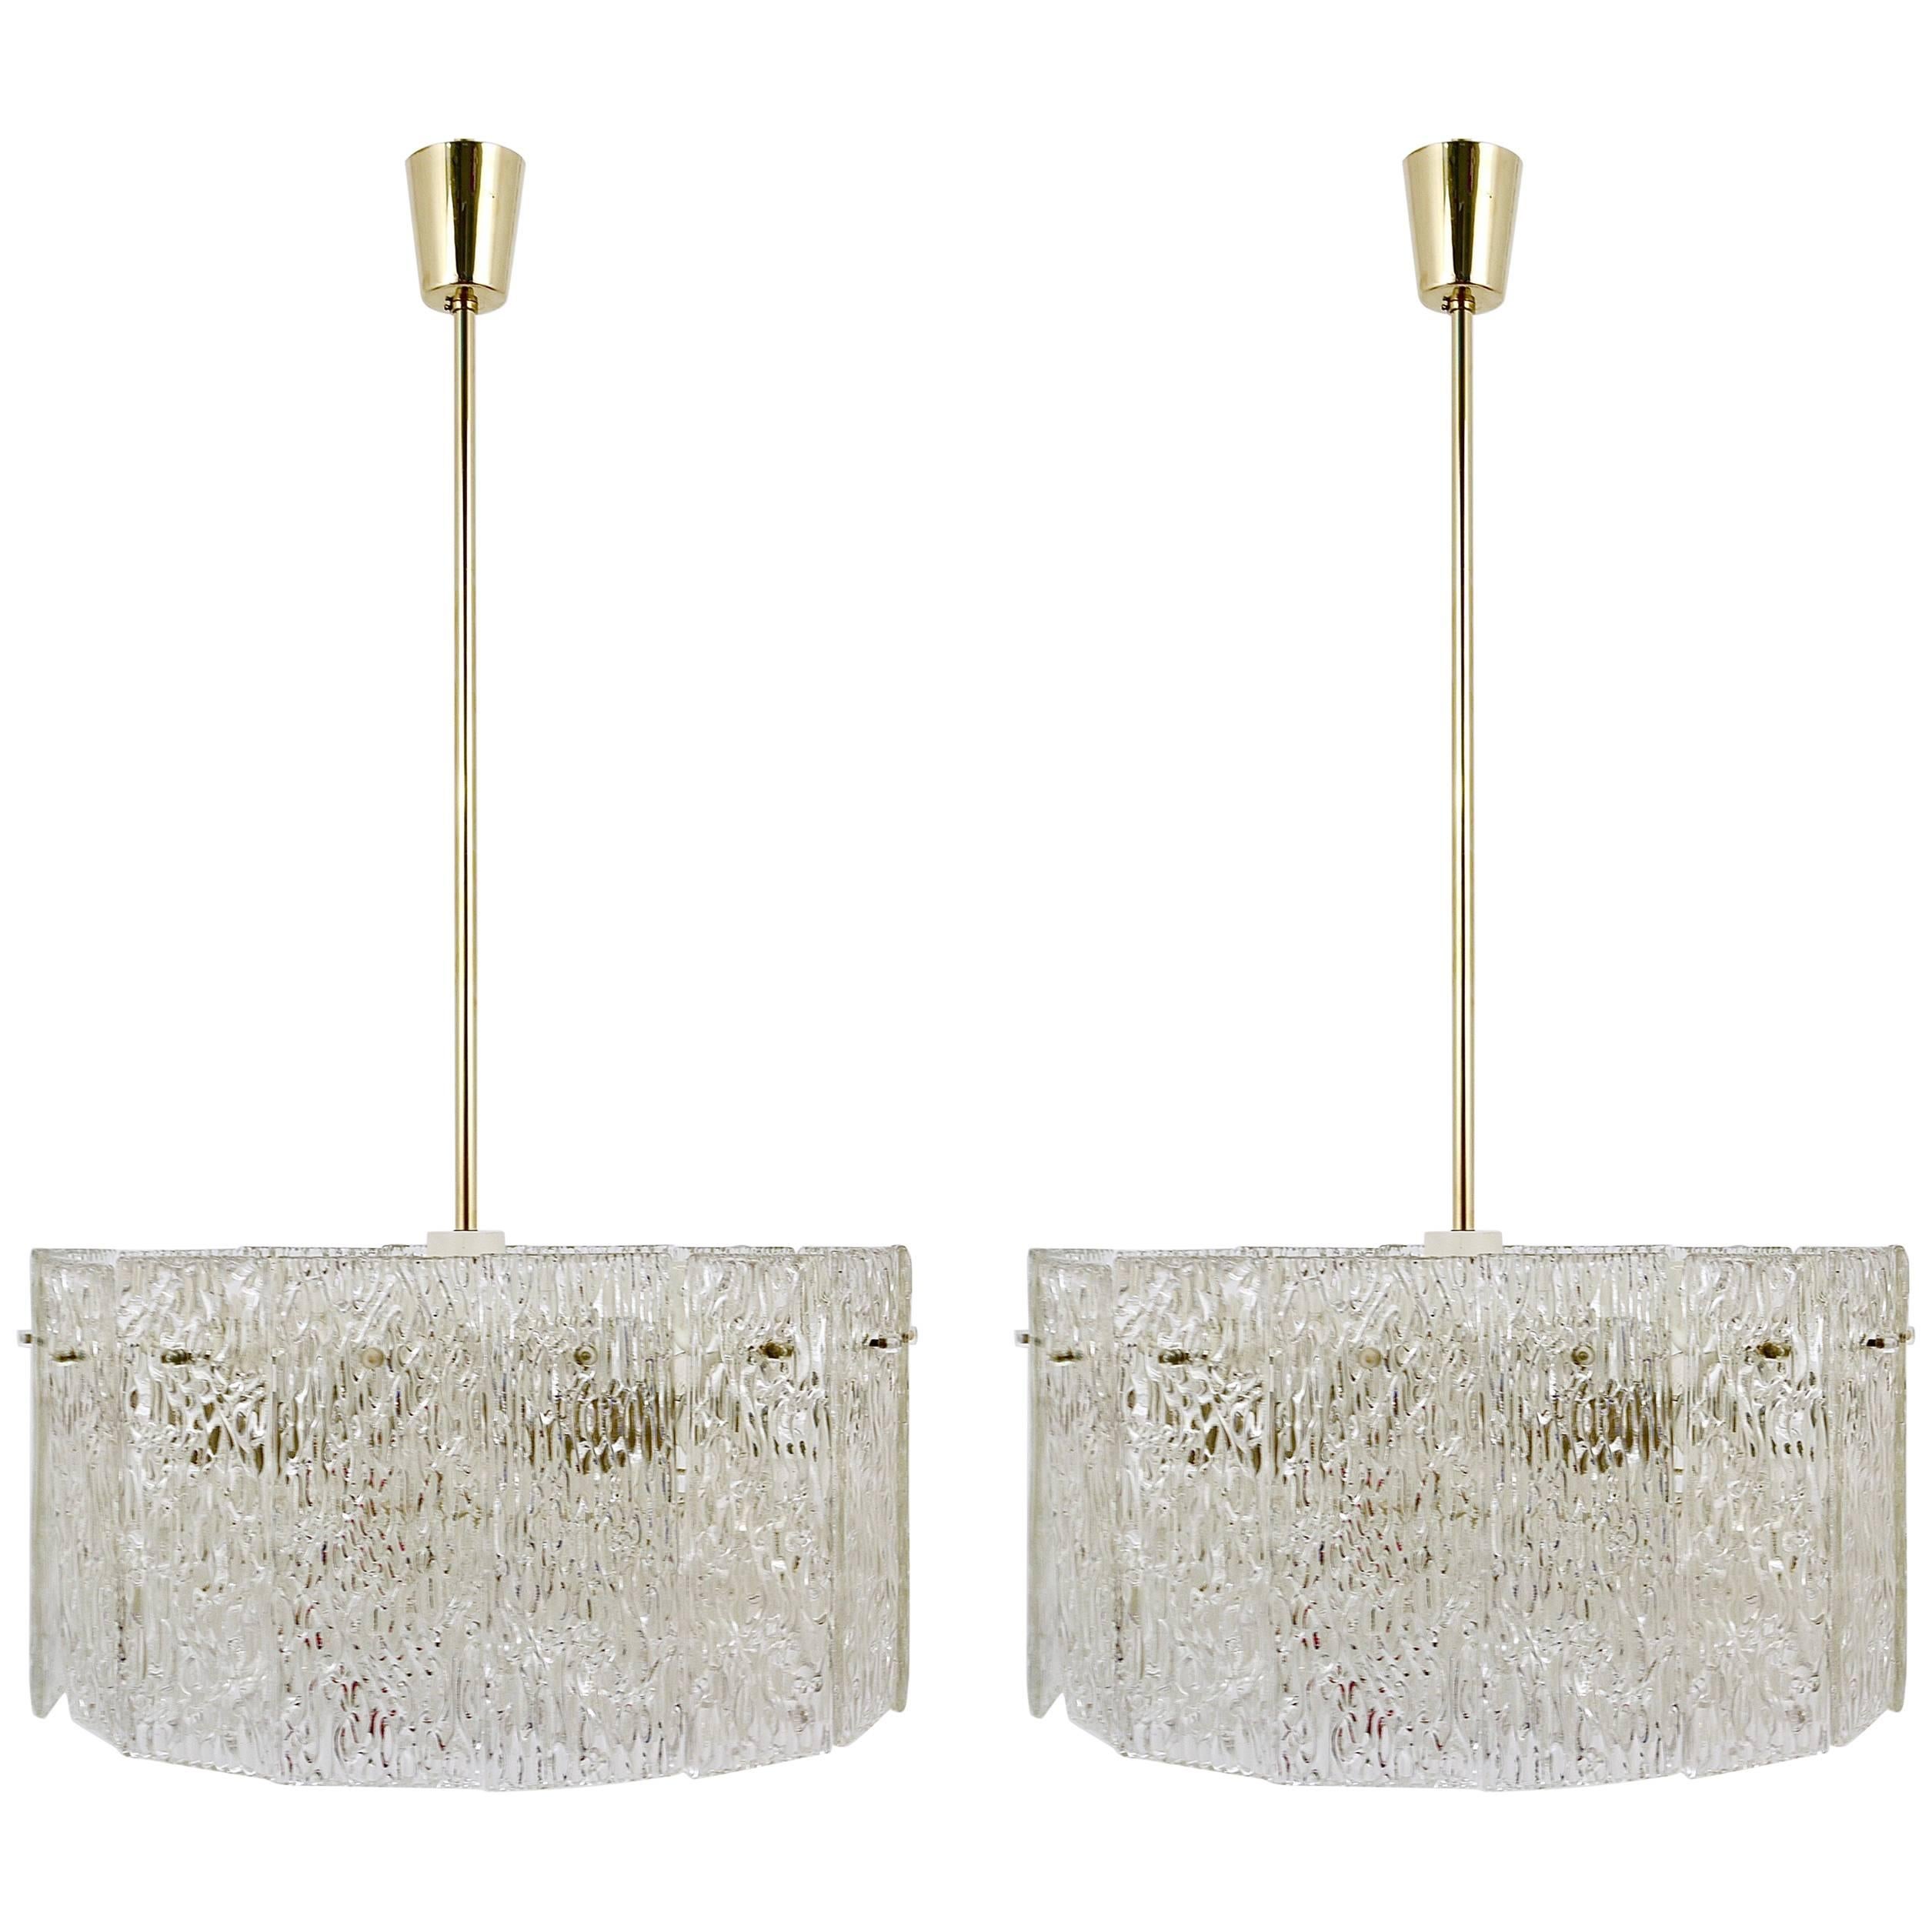 Two Matching Kalmar Brass and Textured Glass Midcentury Chandeliers, 1960s For Sale